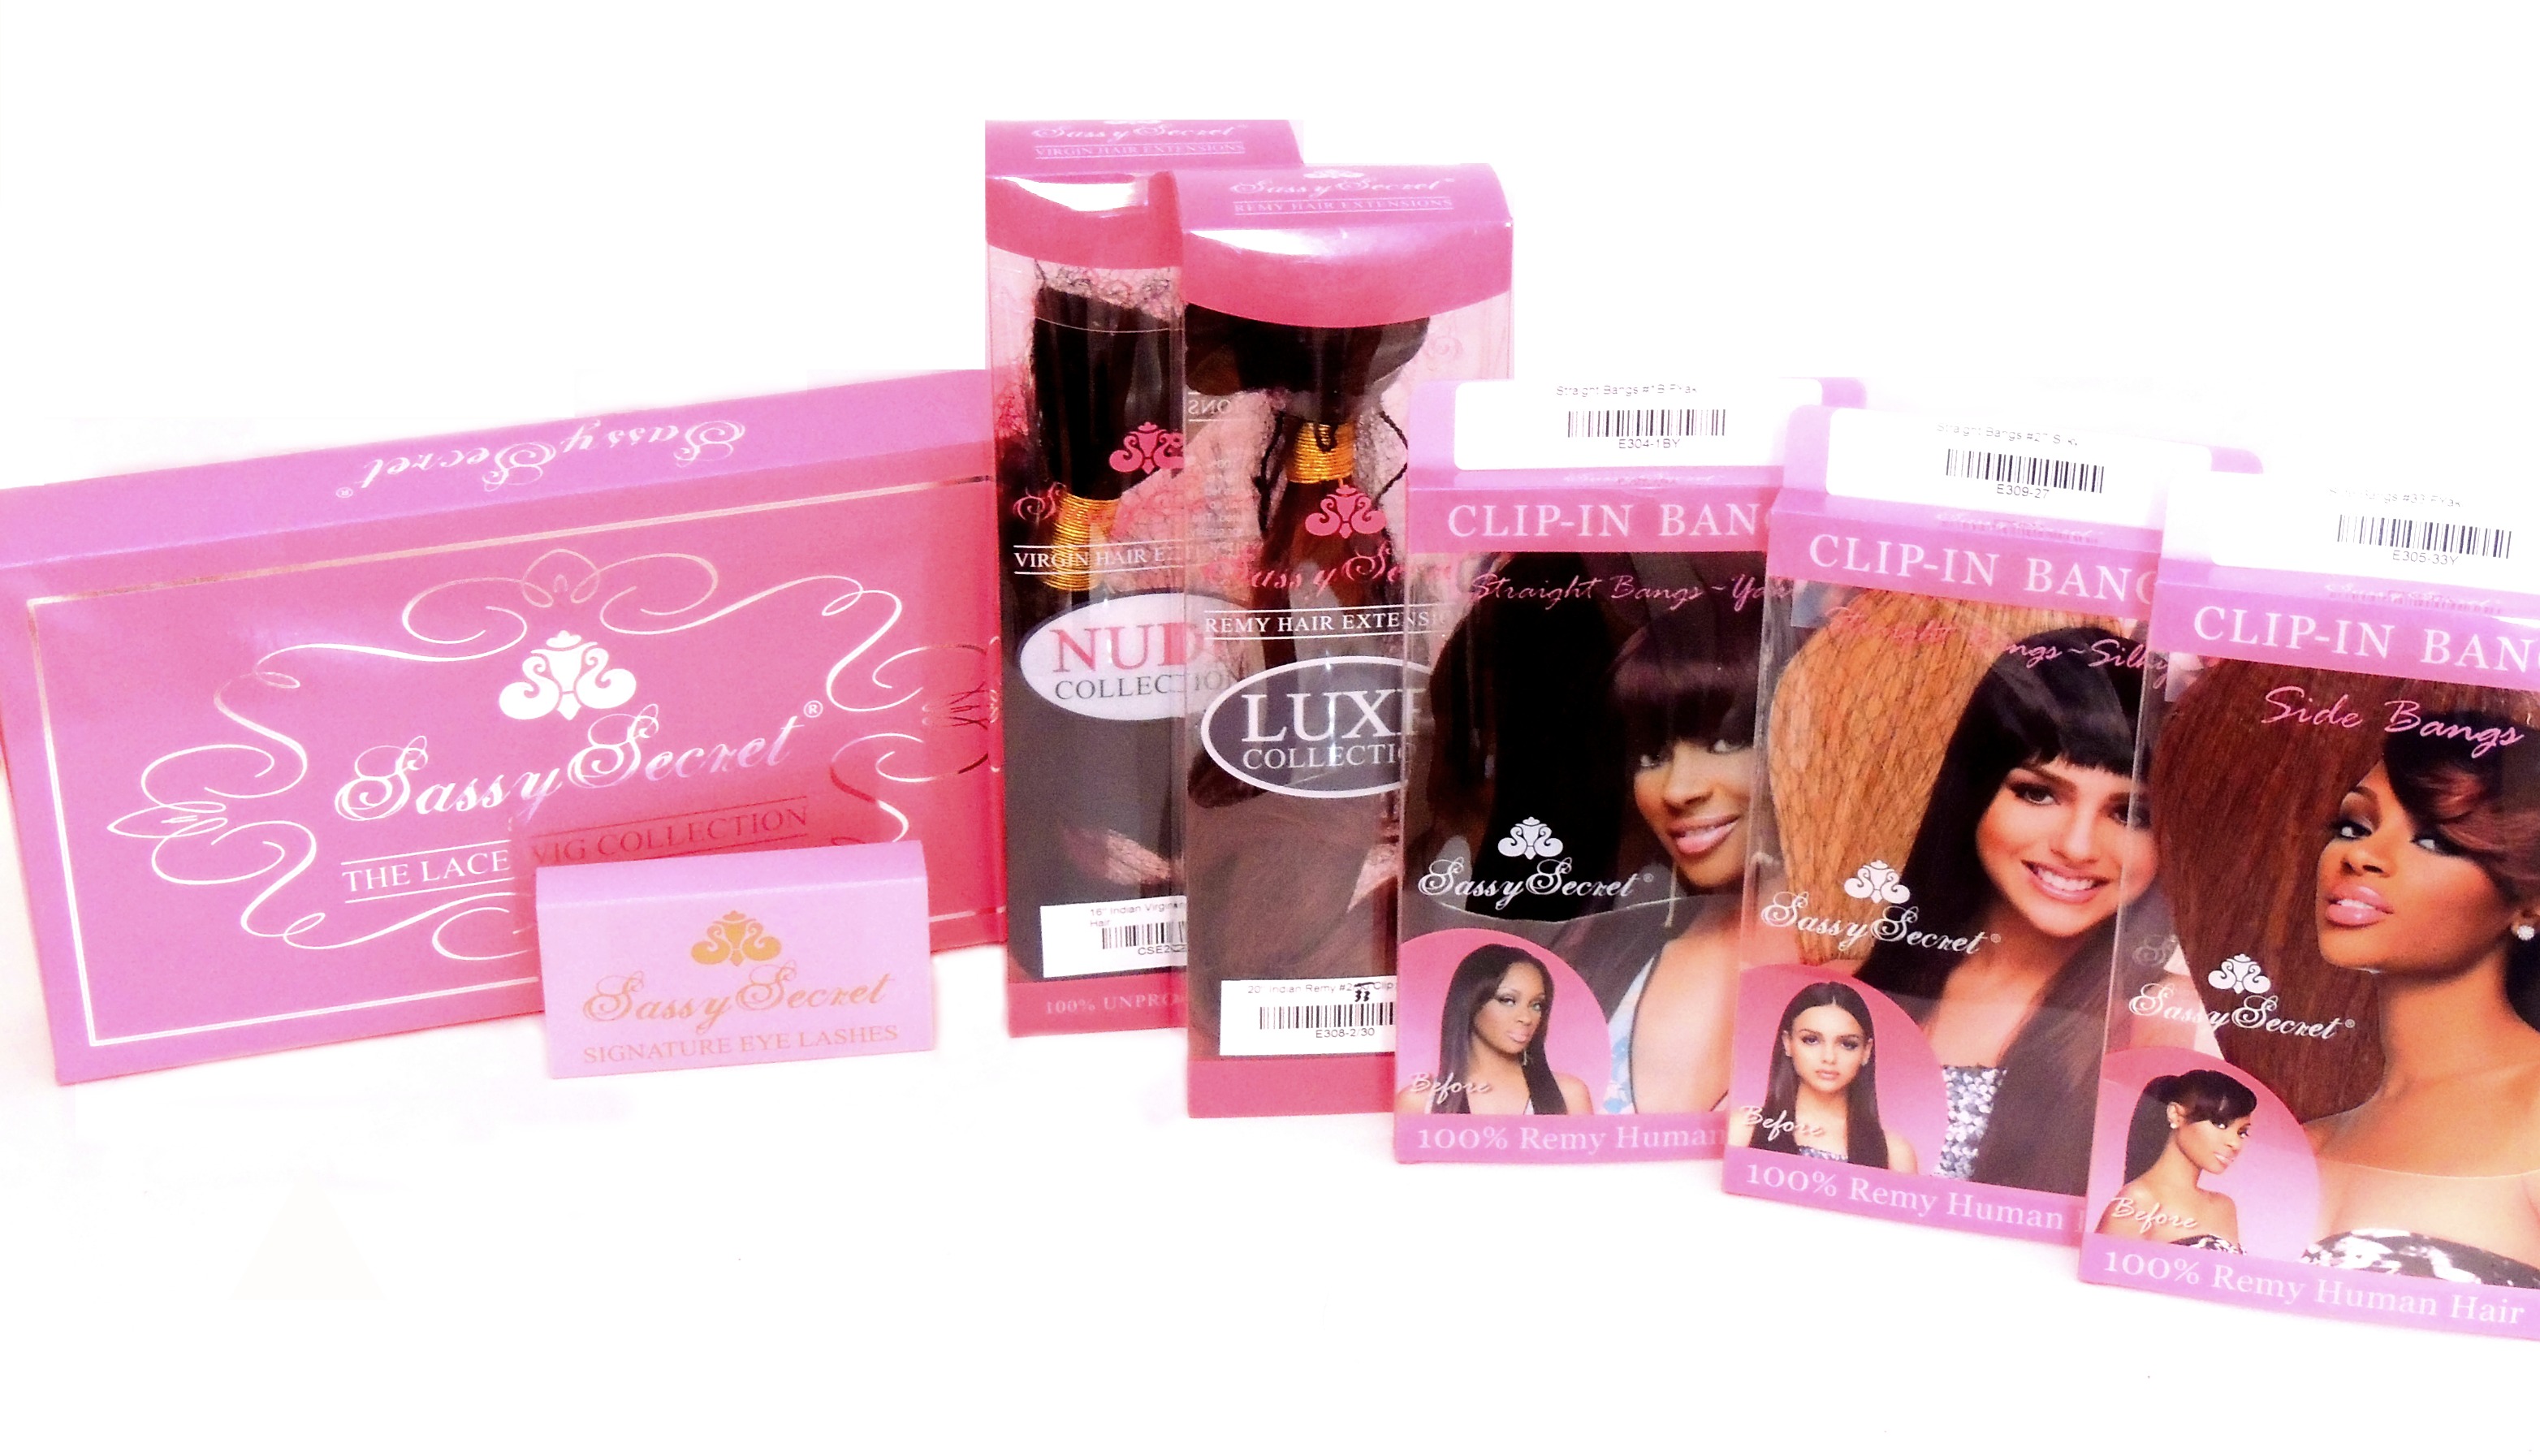 Hair packaging for lace wigs, eye lashes, extensions, and clipins.